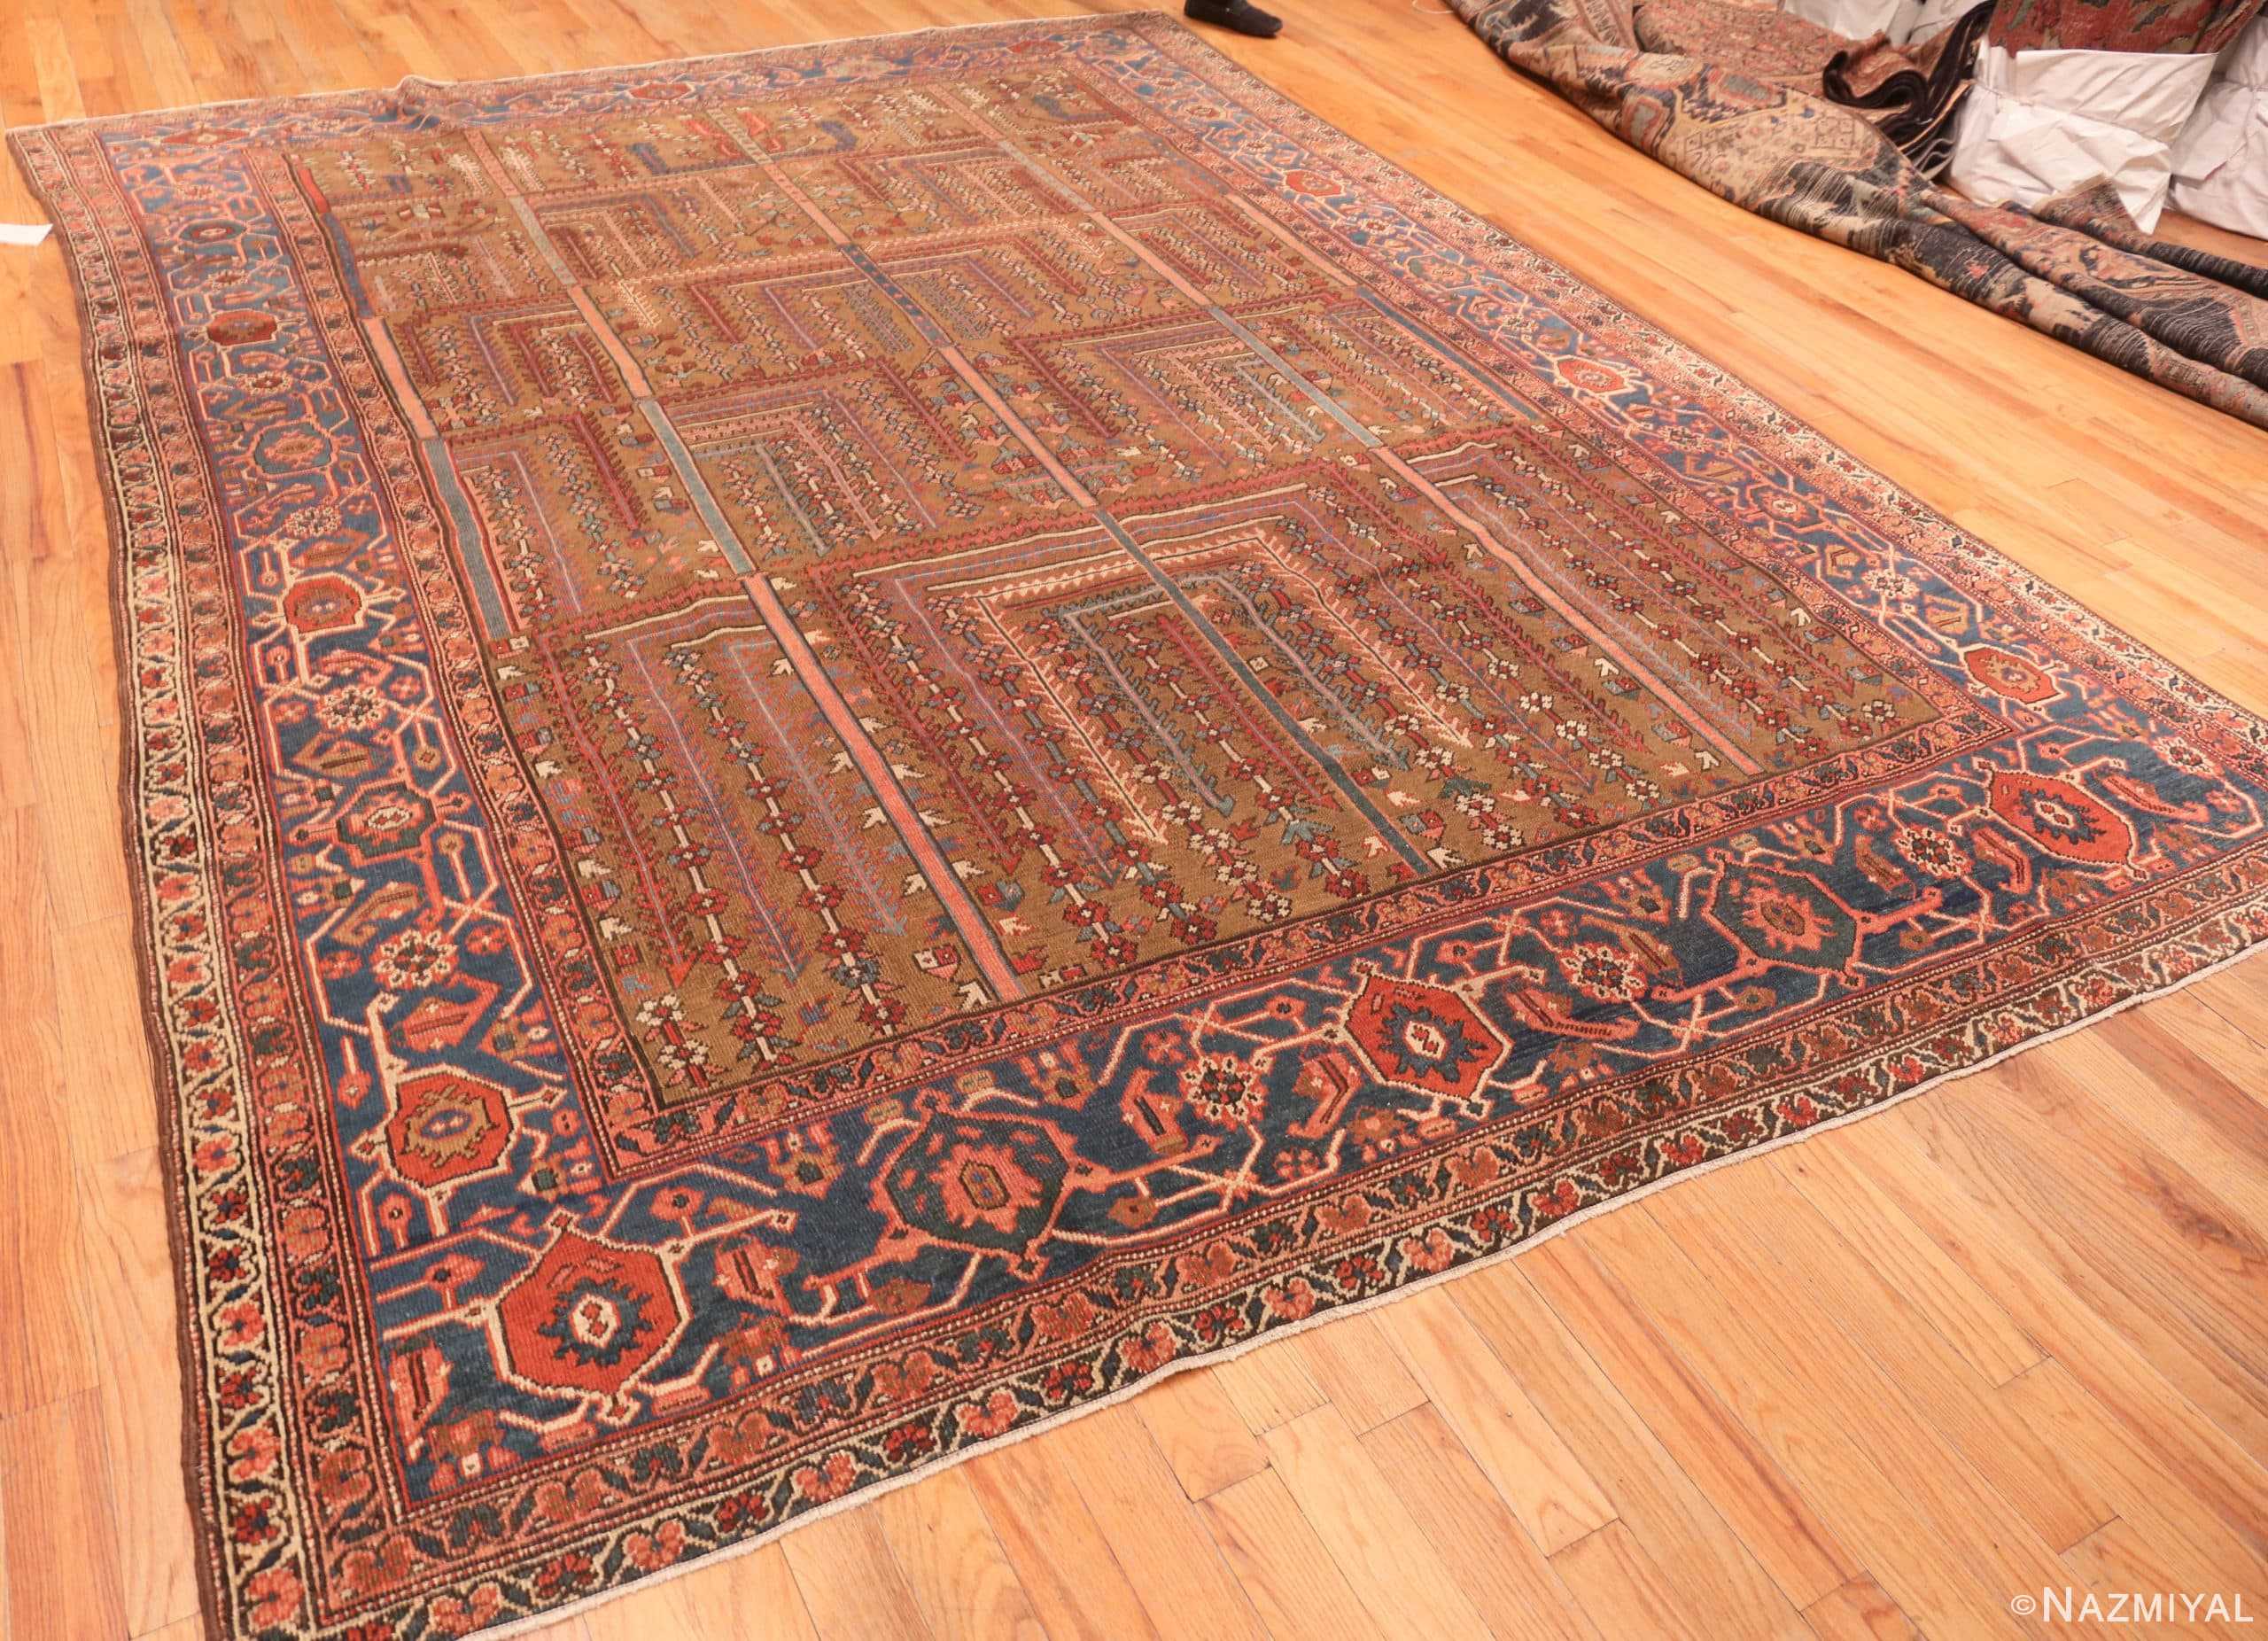 Whole View Of Tree Of Life Design Antique Persian Bakshaish Rug 70874 by Nazmiyal Antique Rugs